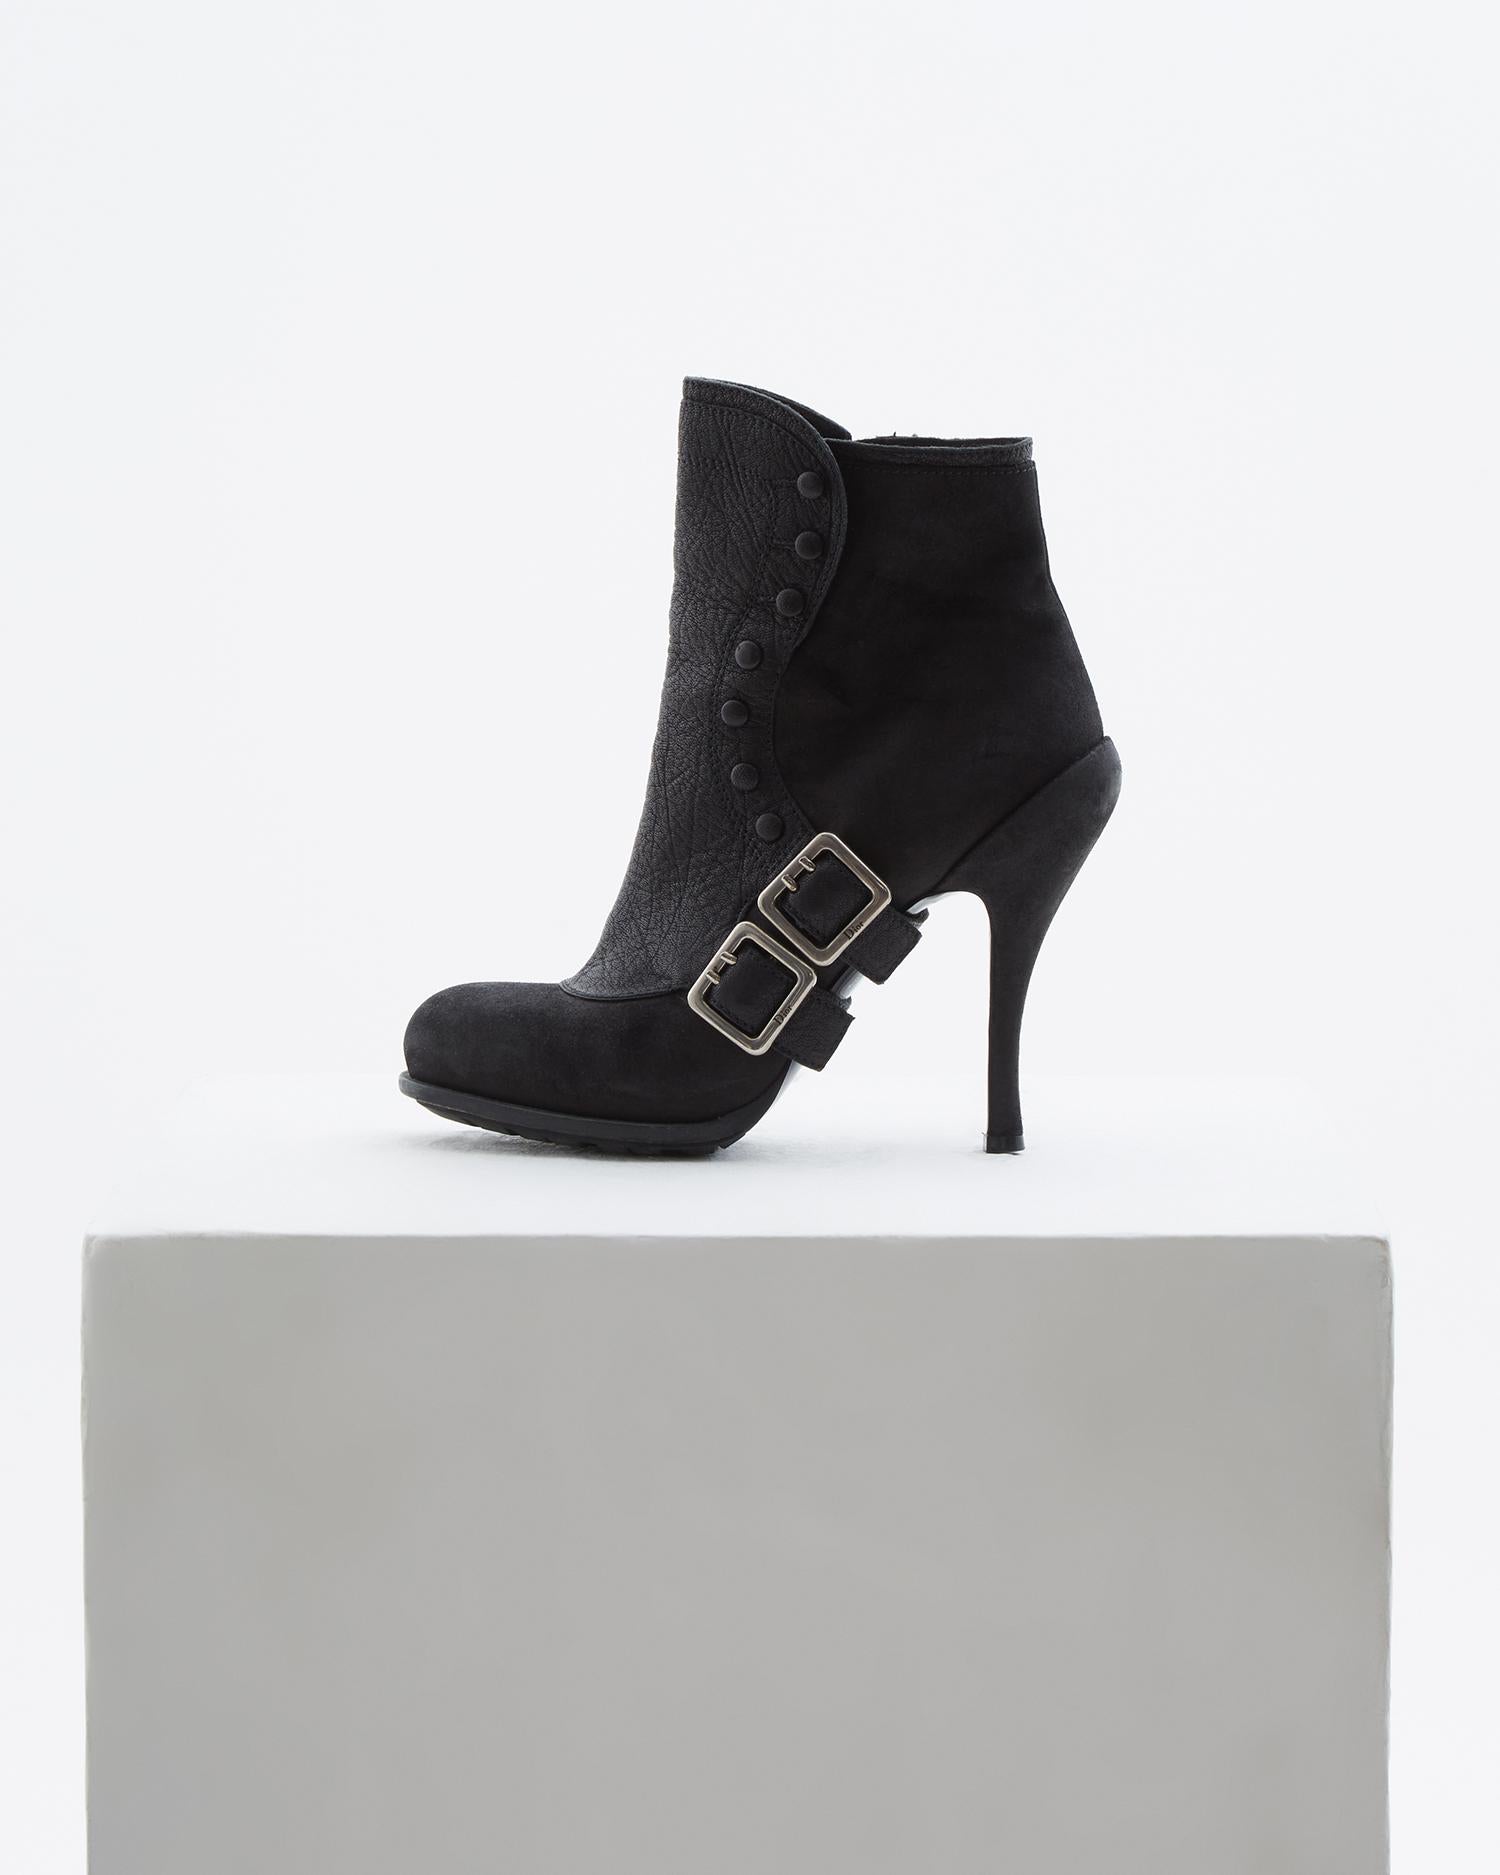 - Designed by John Galliano 
- Sold by Skof.Archive
- Black leather ankle boots accented by weathered silver metal 